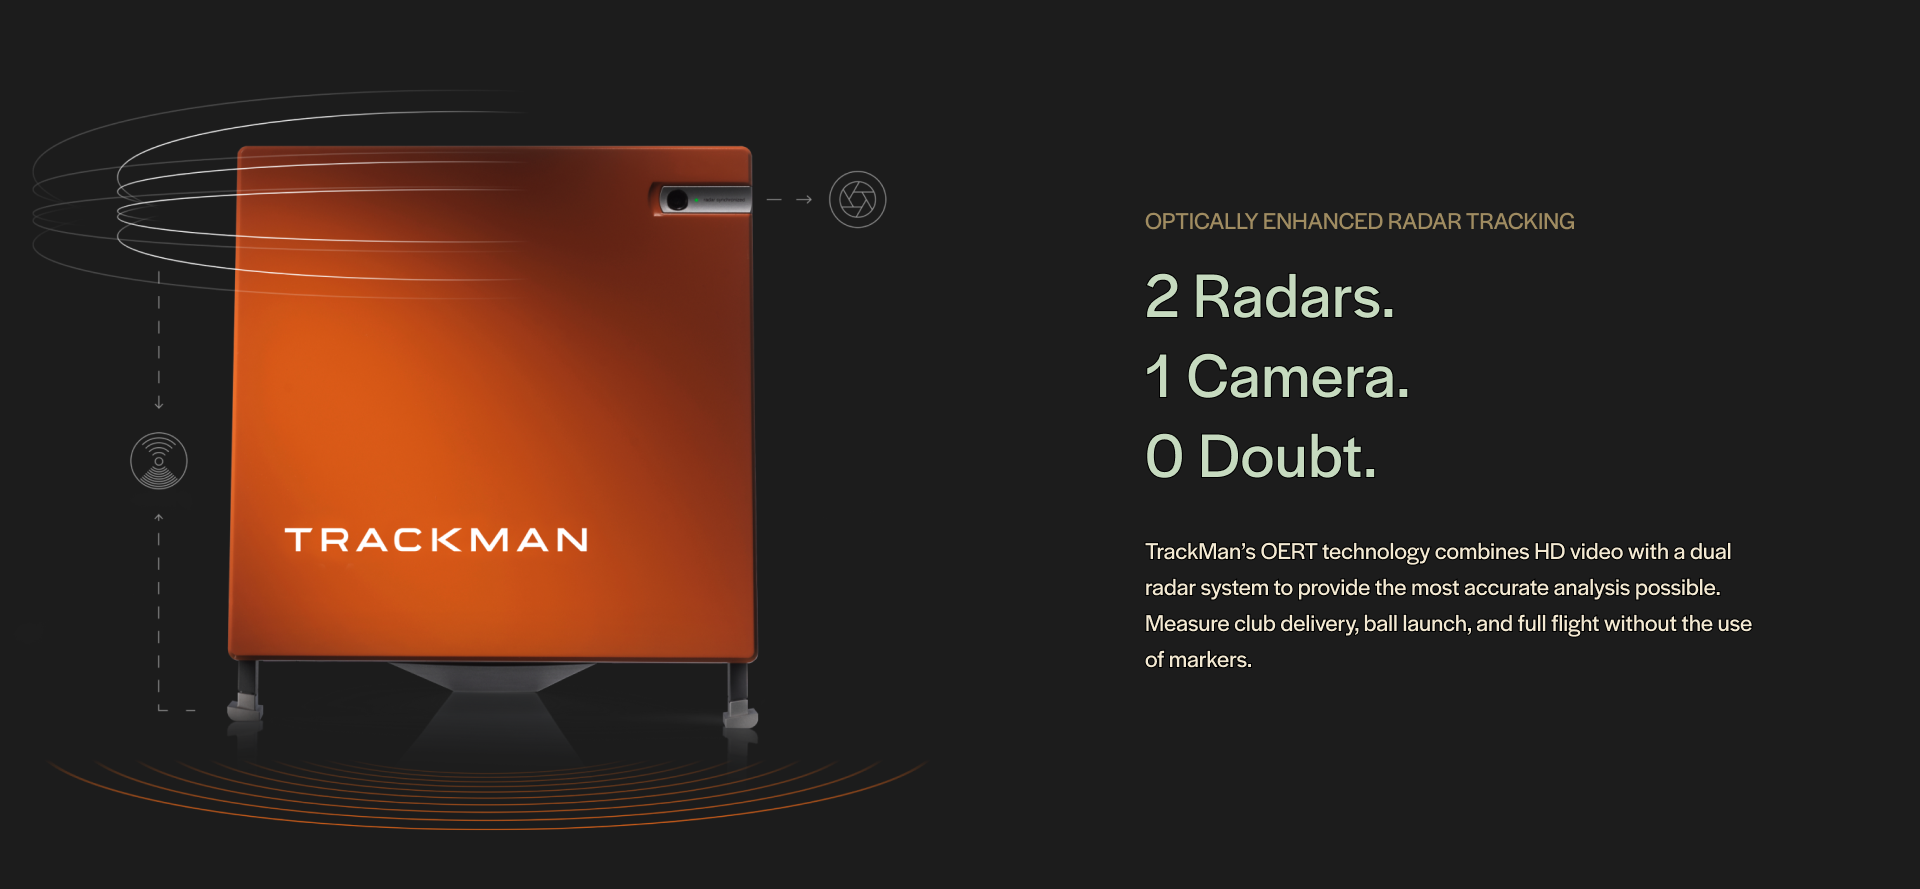 Optically Enhanced Radar Tracking. Trackman’s OERT technology combines HD video with a dual radar system to provide the most accurate analysis possible.